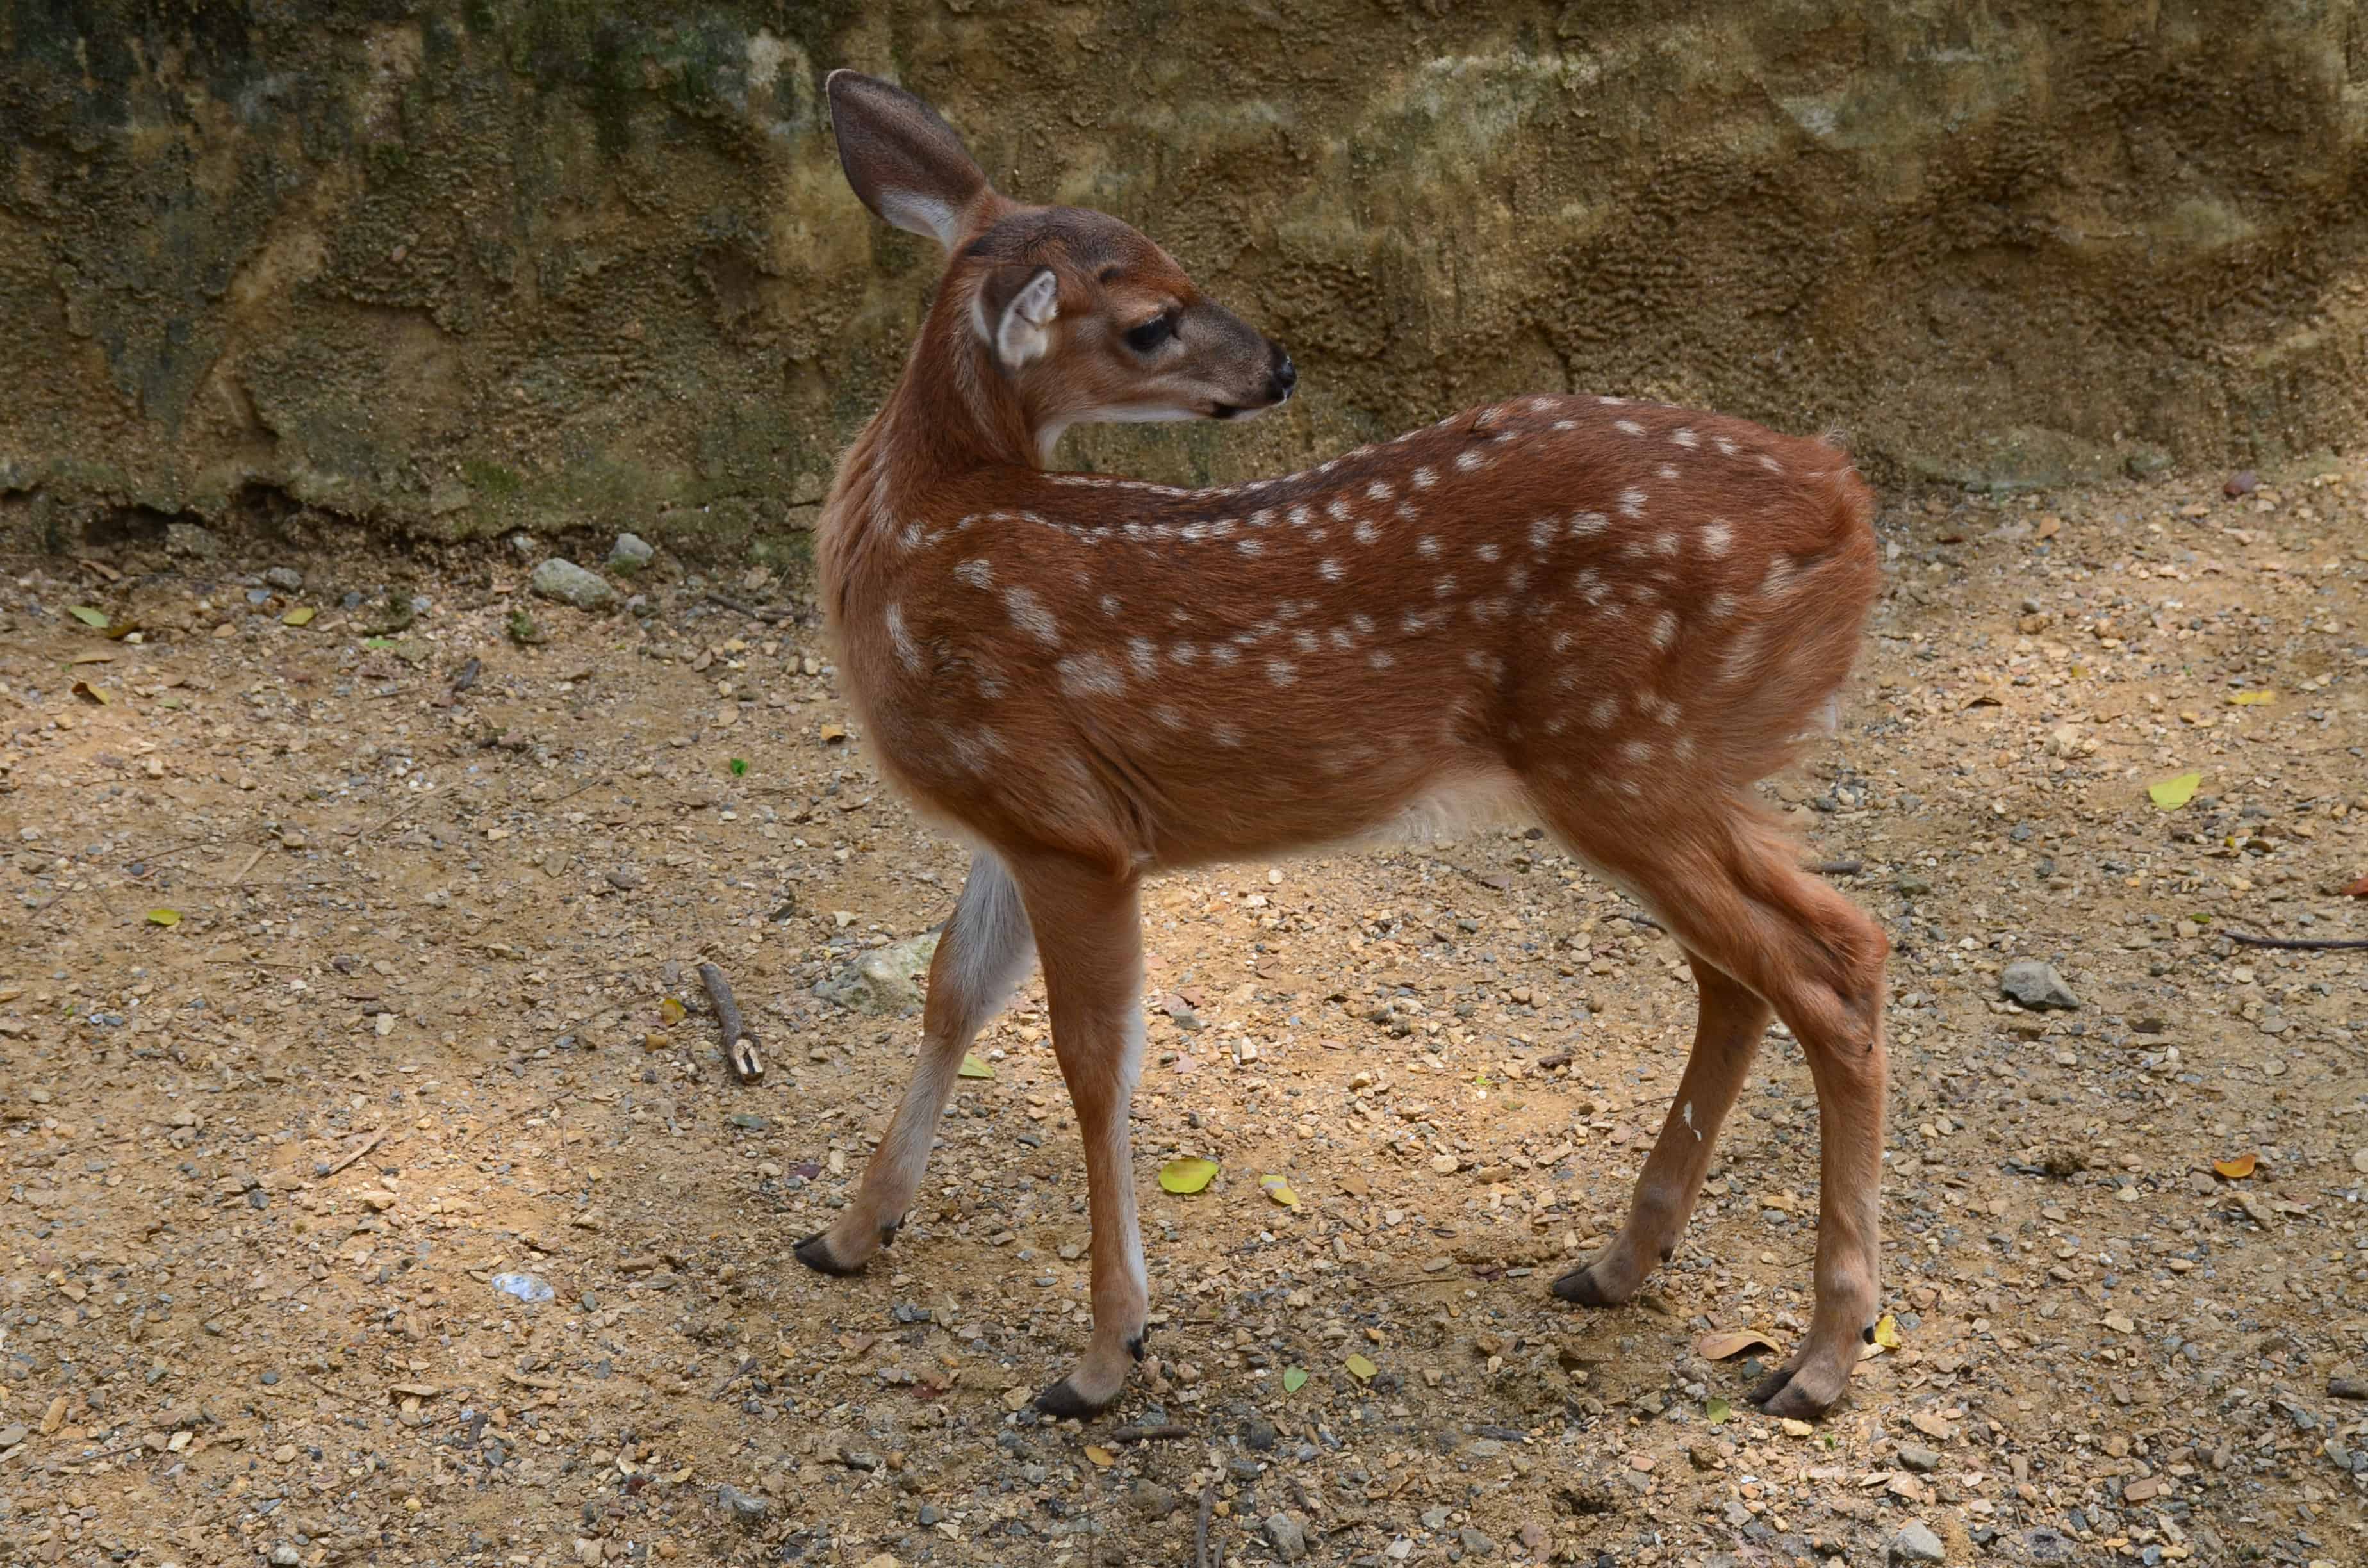 Deer at the Cali Zoo in Colombia